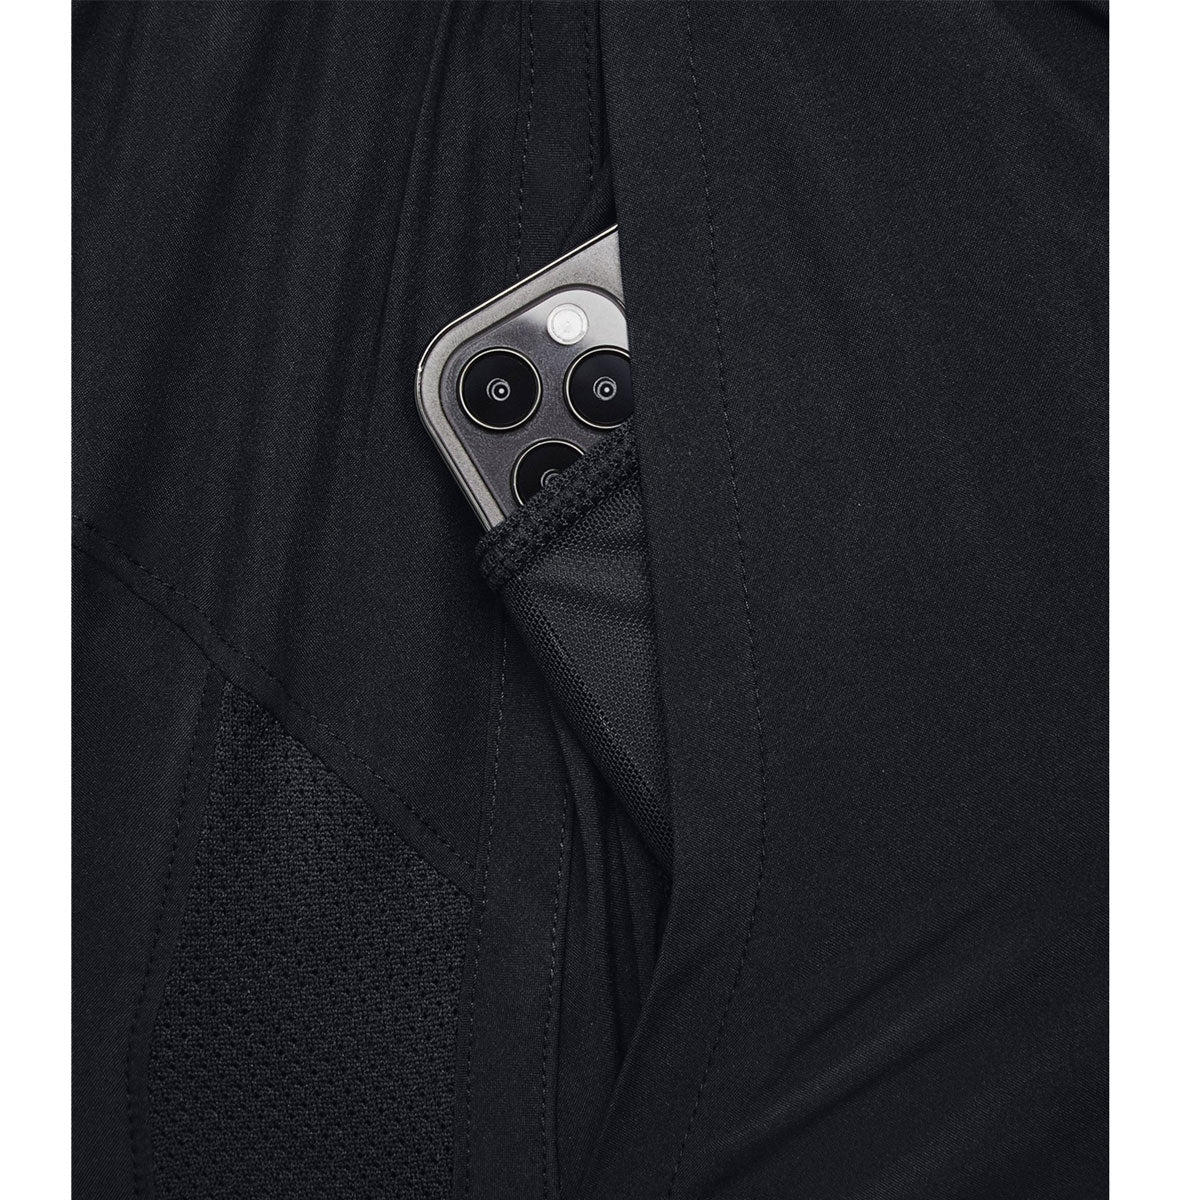 Under Armour Launch 5 inch Running Shorts - Mens - Black/Reflective